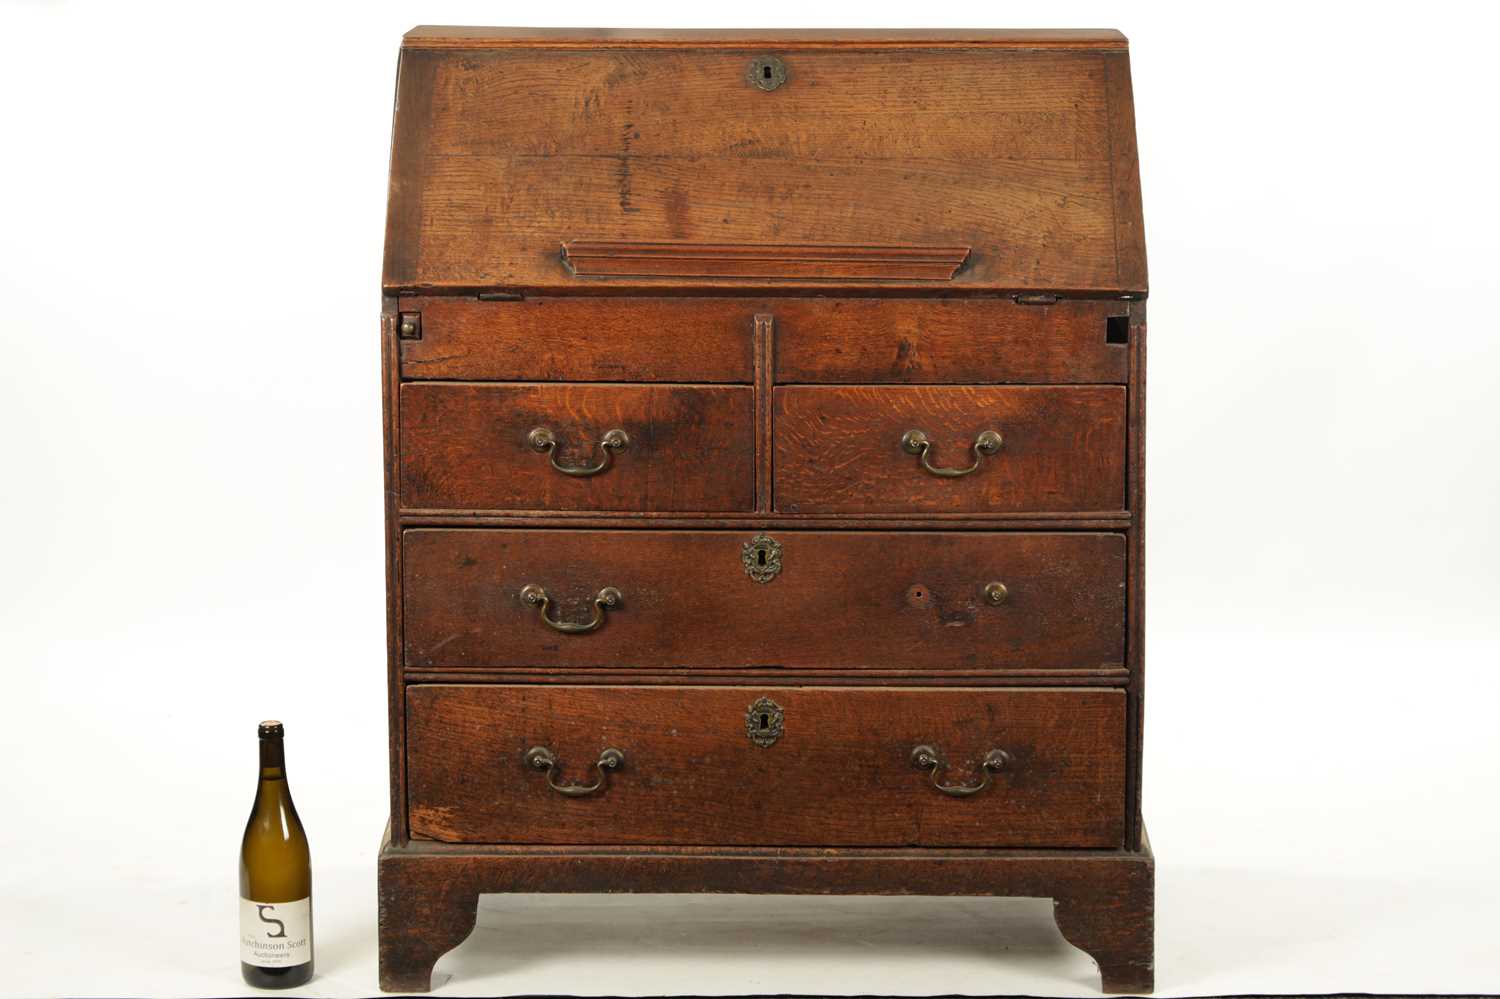 AN EARLY 18TH CENTURY FIGURED OAK COUNTRY MADE BUREAU - Image 2 of 11